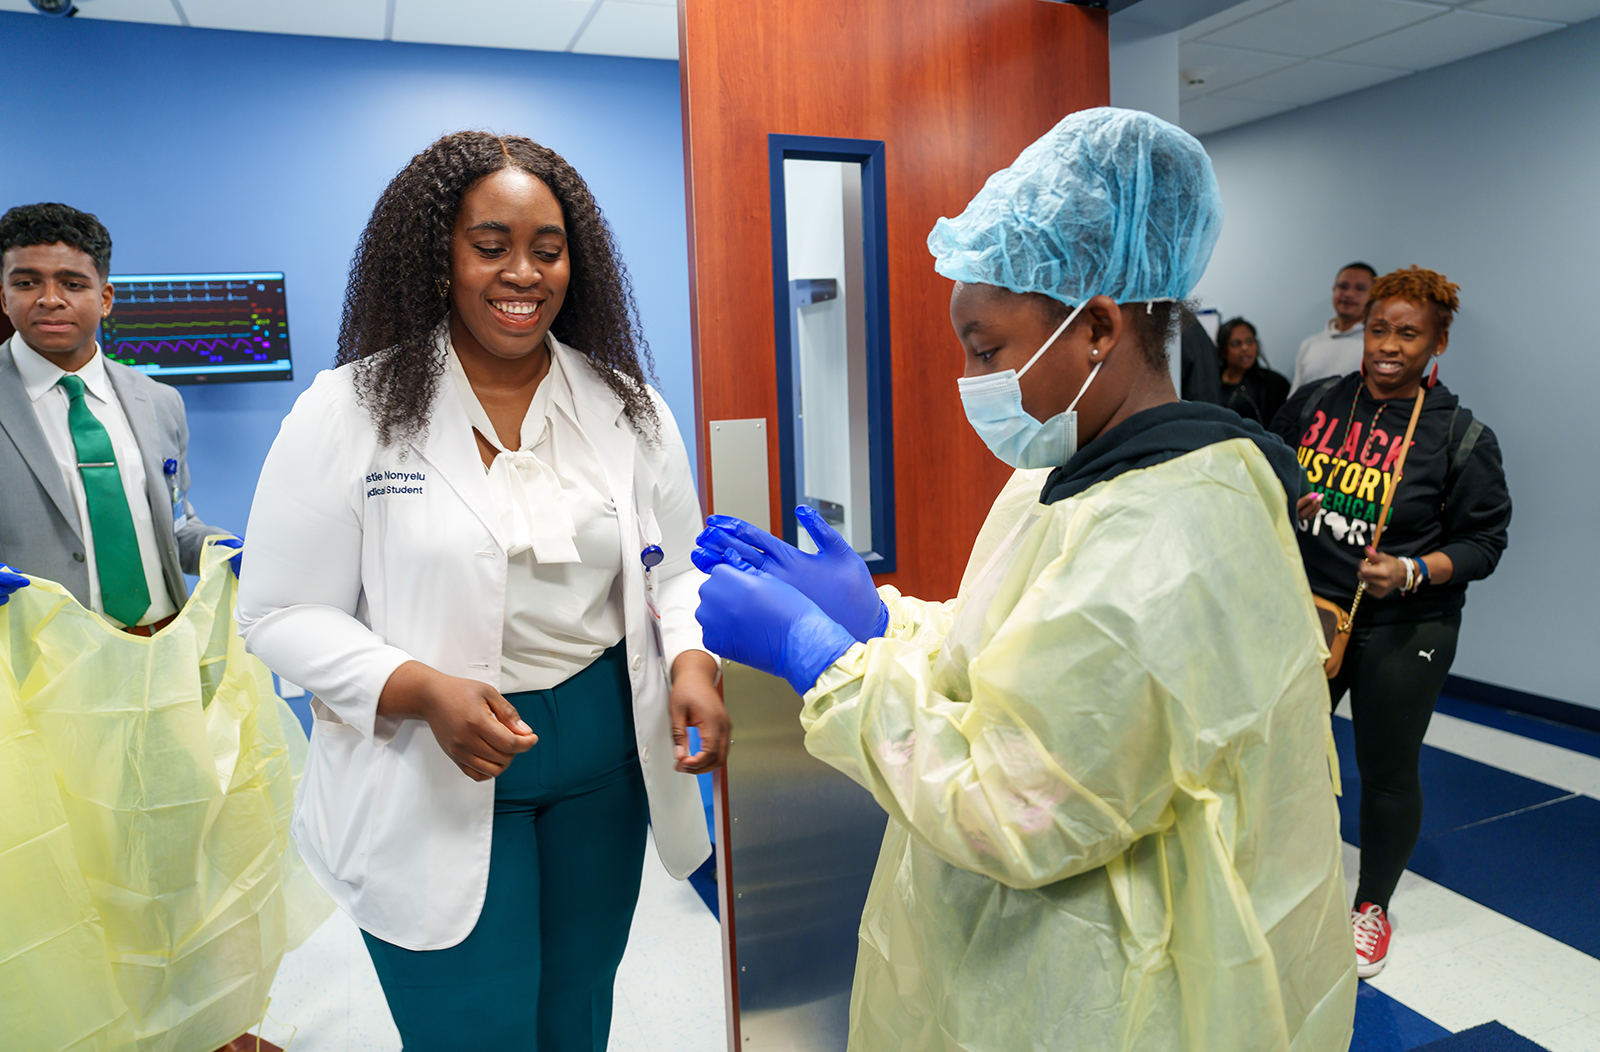 Third-year medical student Kristie Nonyelu doing a "mock" surgery scrub-in with an attendee of the Black Men in White Coats event